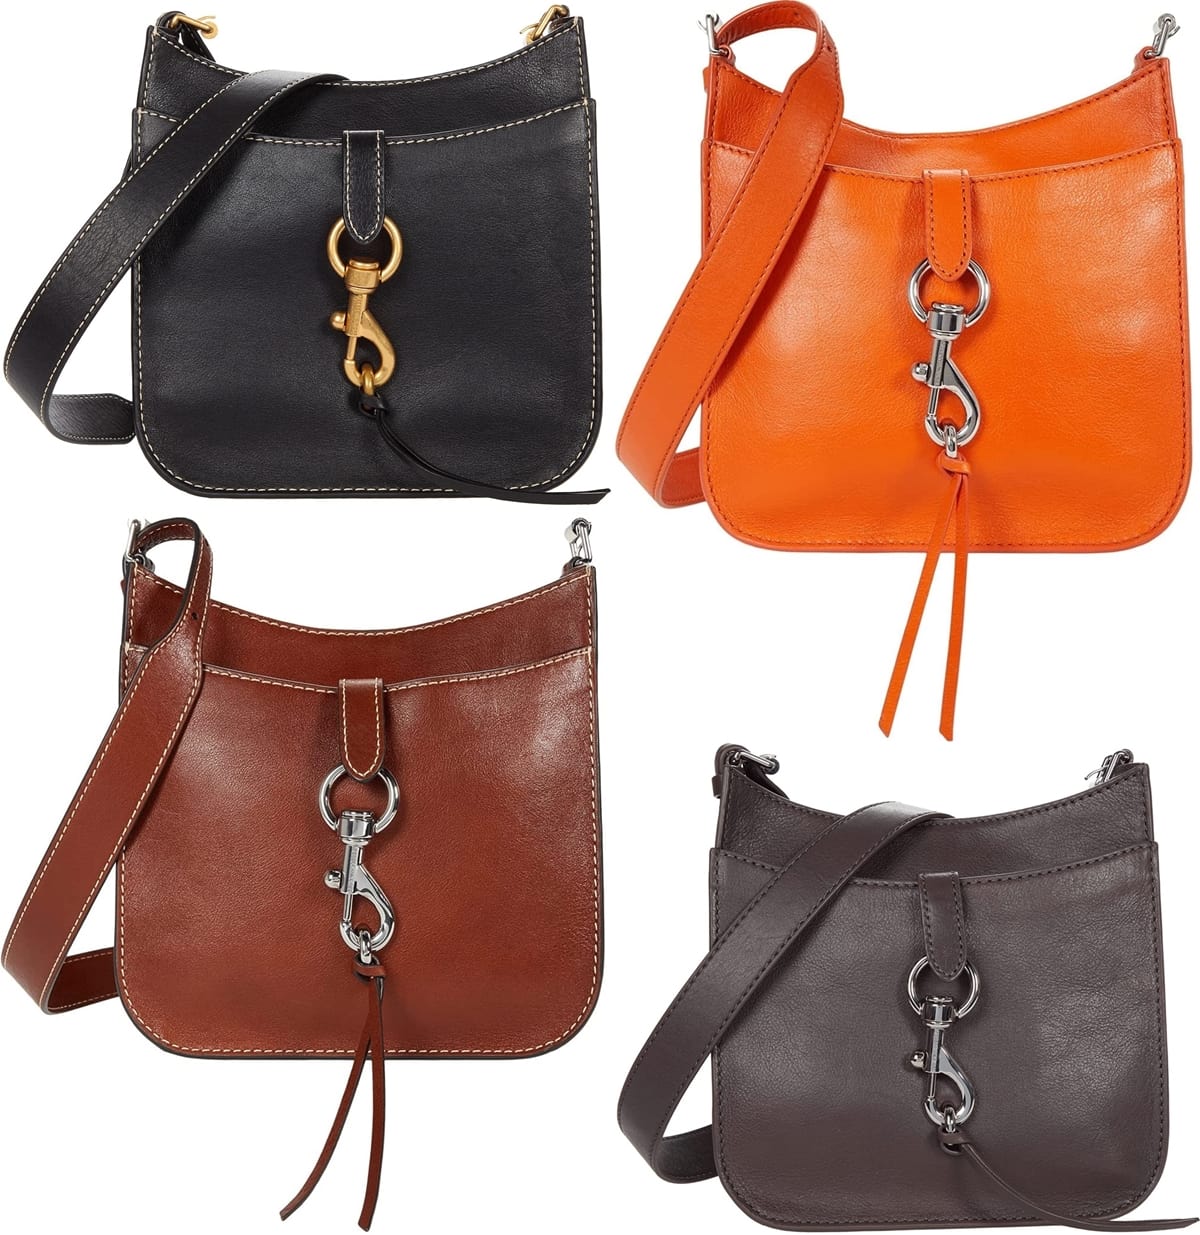 Rebecca Minkoff''s Megan Soft Small Feed Crossbody features metallic hardware closures that keep everything safe